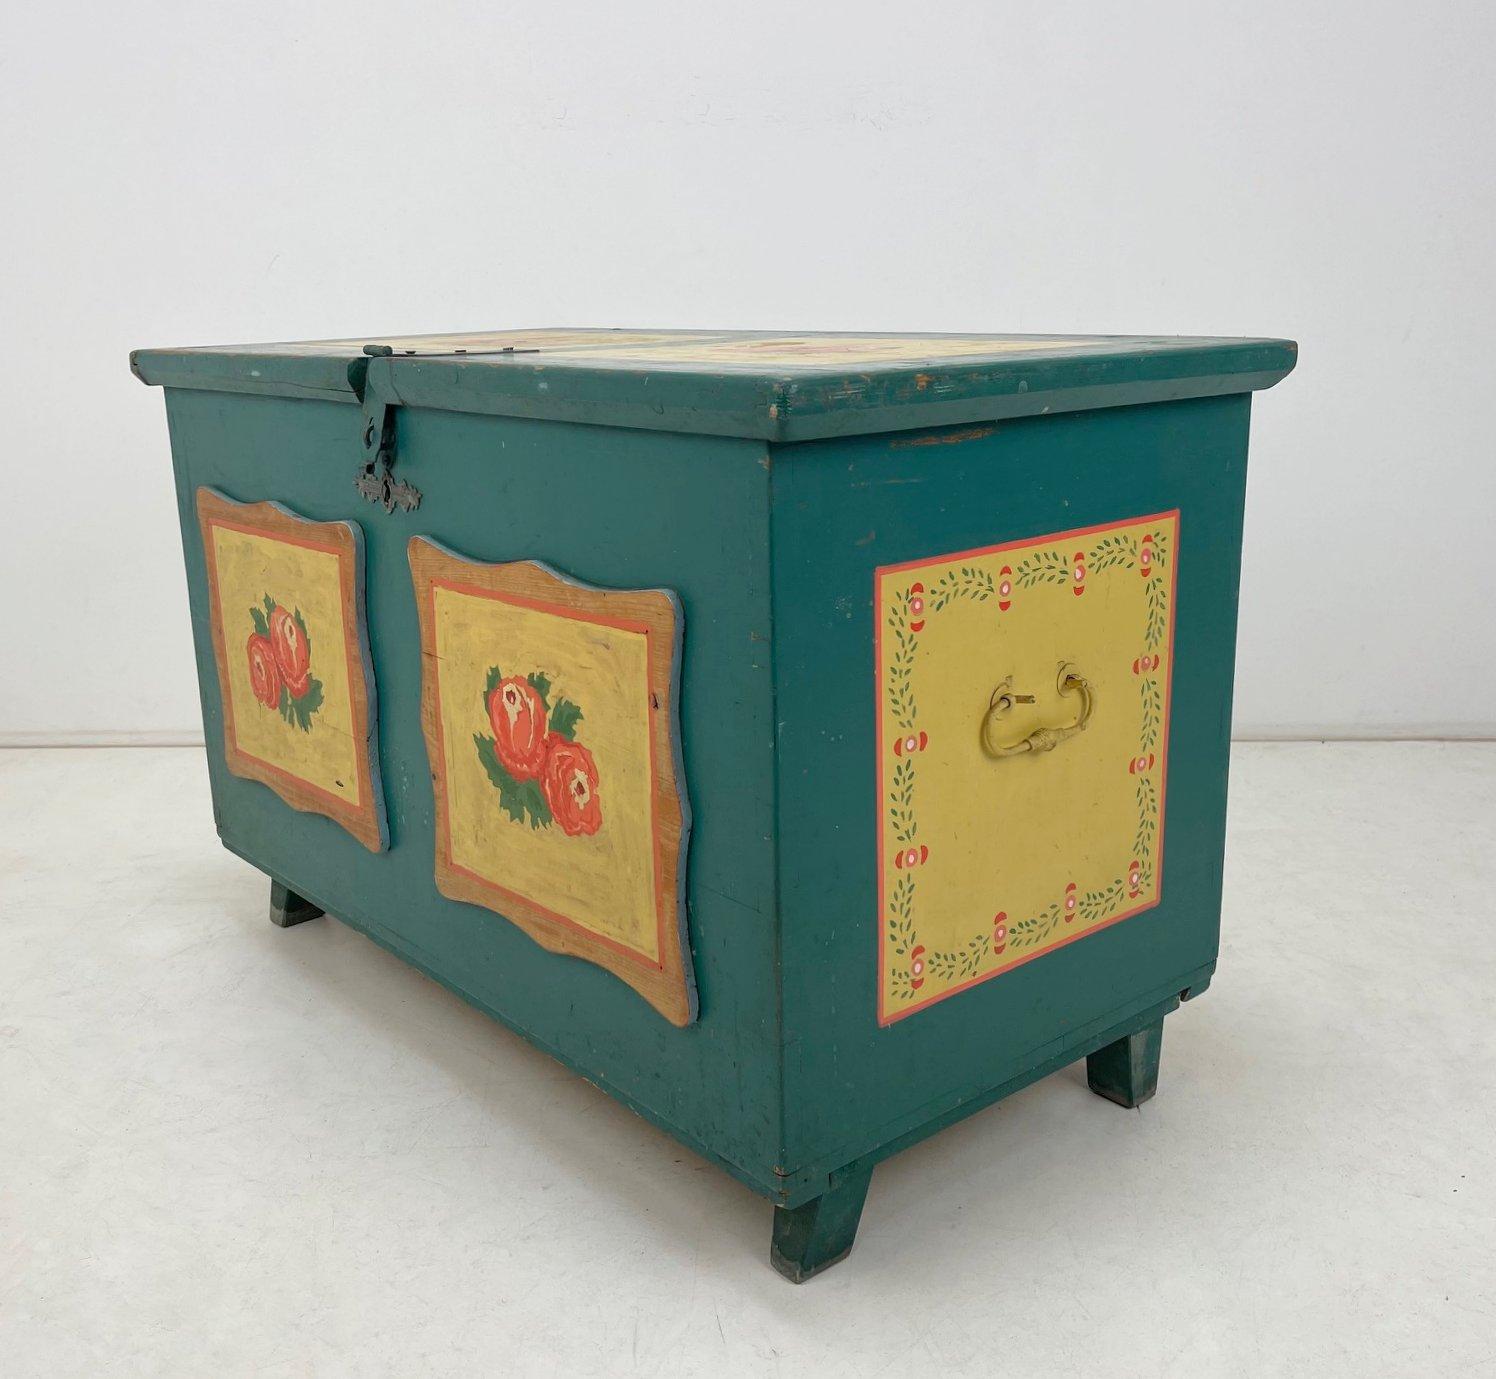 Wooden hand painted chest with folk pattern. Saved from an old mill in the former Czechoslovakia.